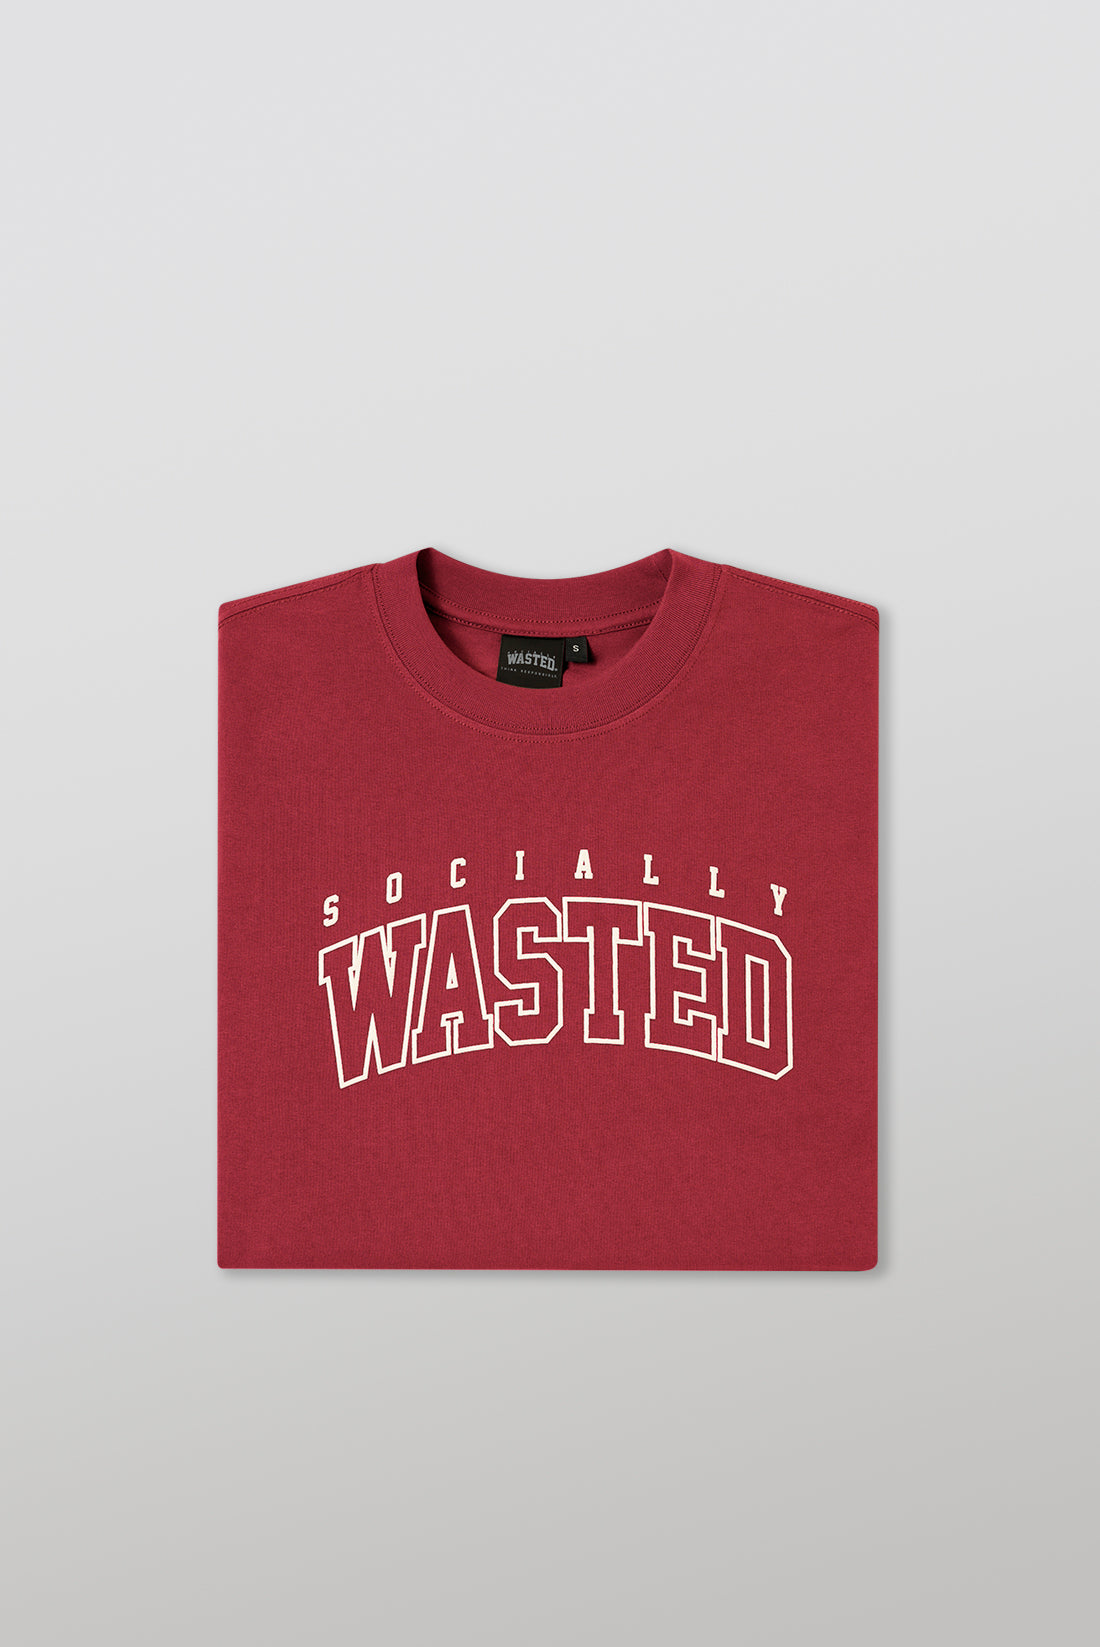 
                  
                    Socially Wasted Flagship Cranberry
                  
                